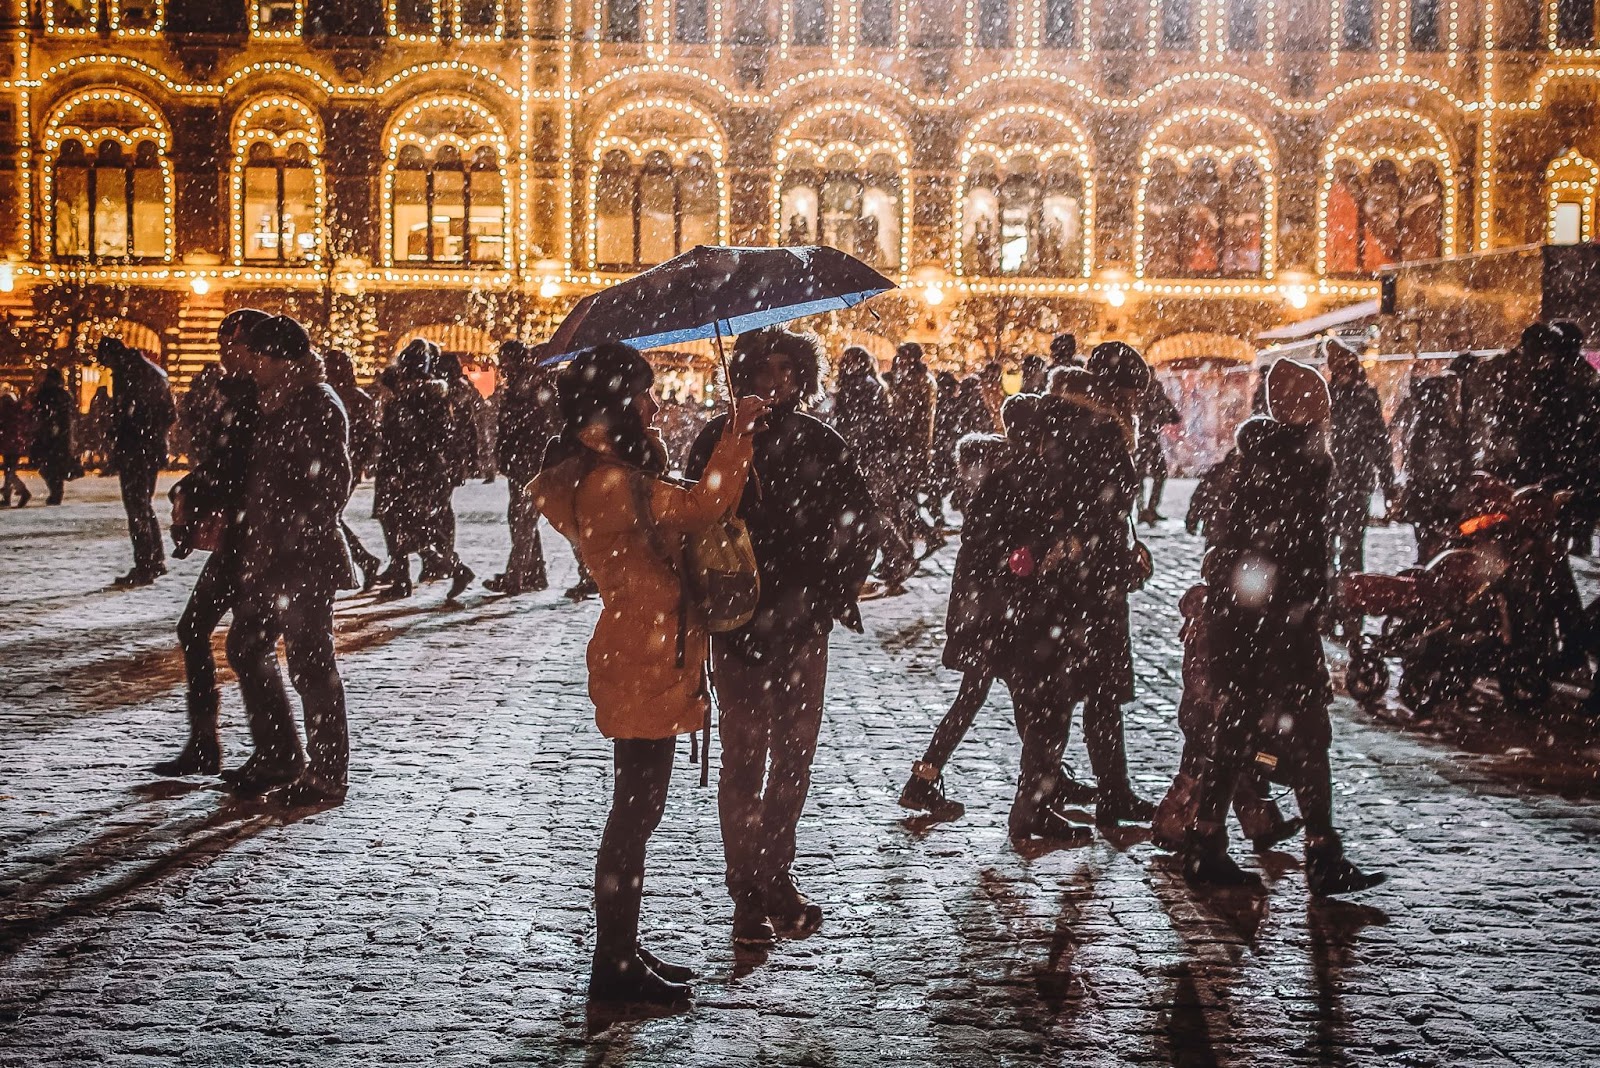 People walking on a busy street in the snow with christmas lights adorned the building in the background